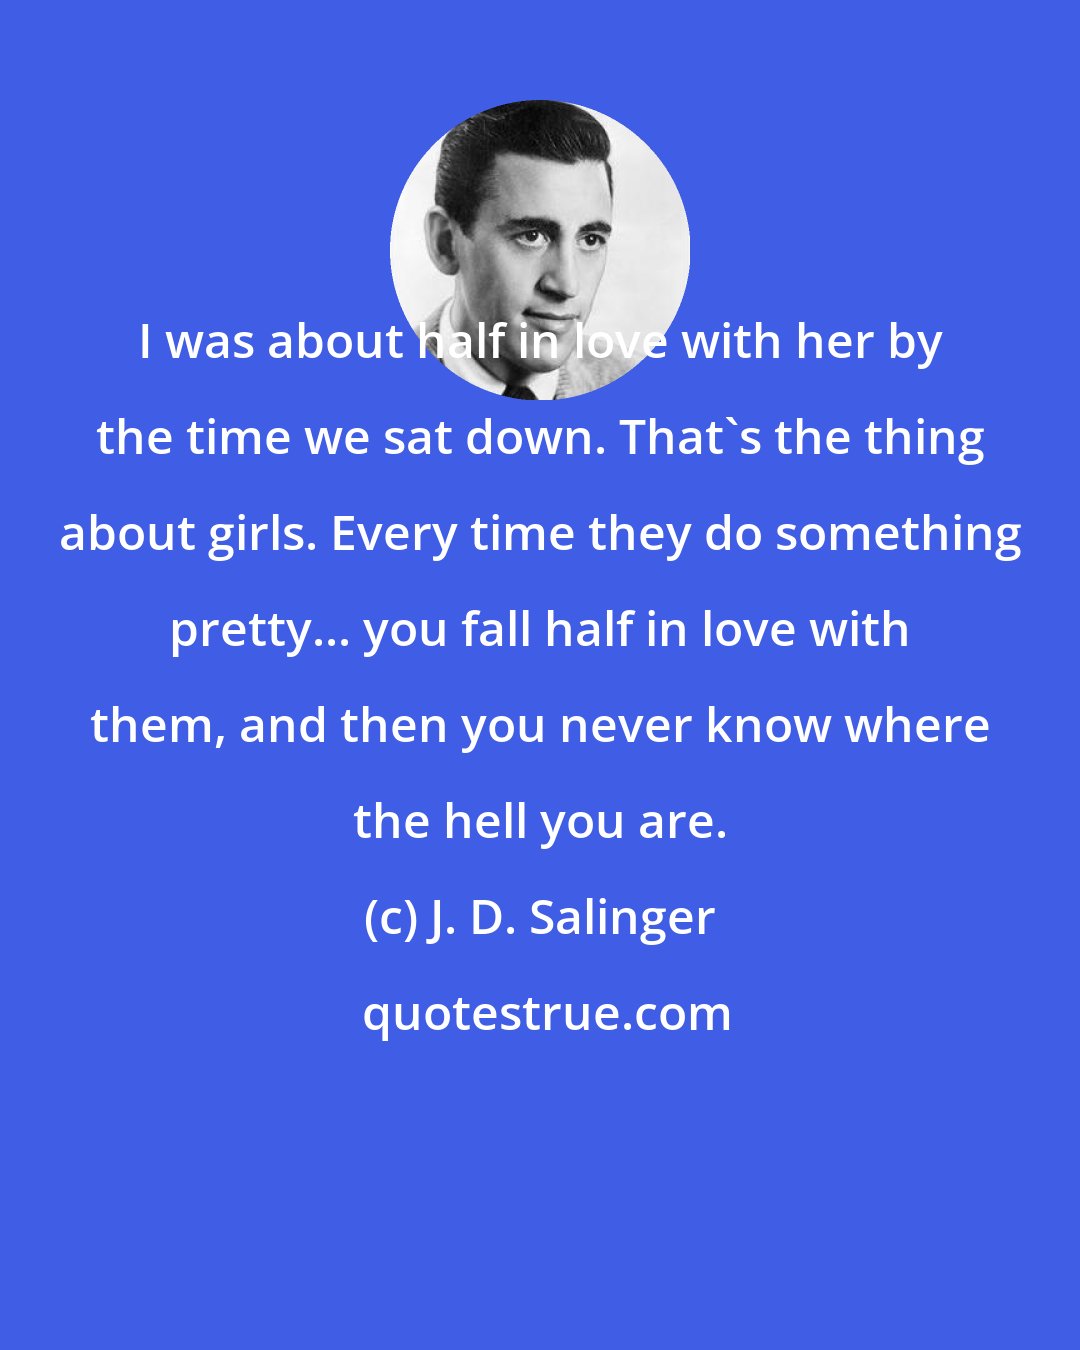 J. D. Salinger: I was about half in love with her by the time we sat down. That's the thing about girls. Every time they do something pretty... you fall half in love with them, and then you never know where the hell you are.